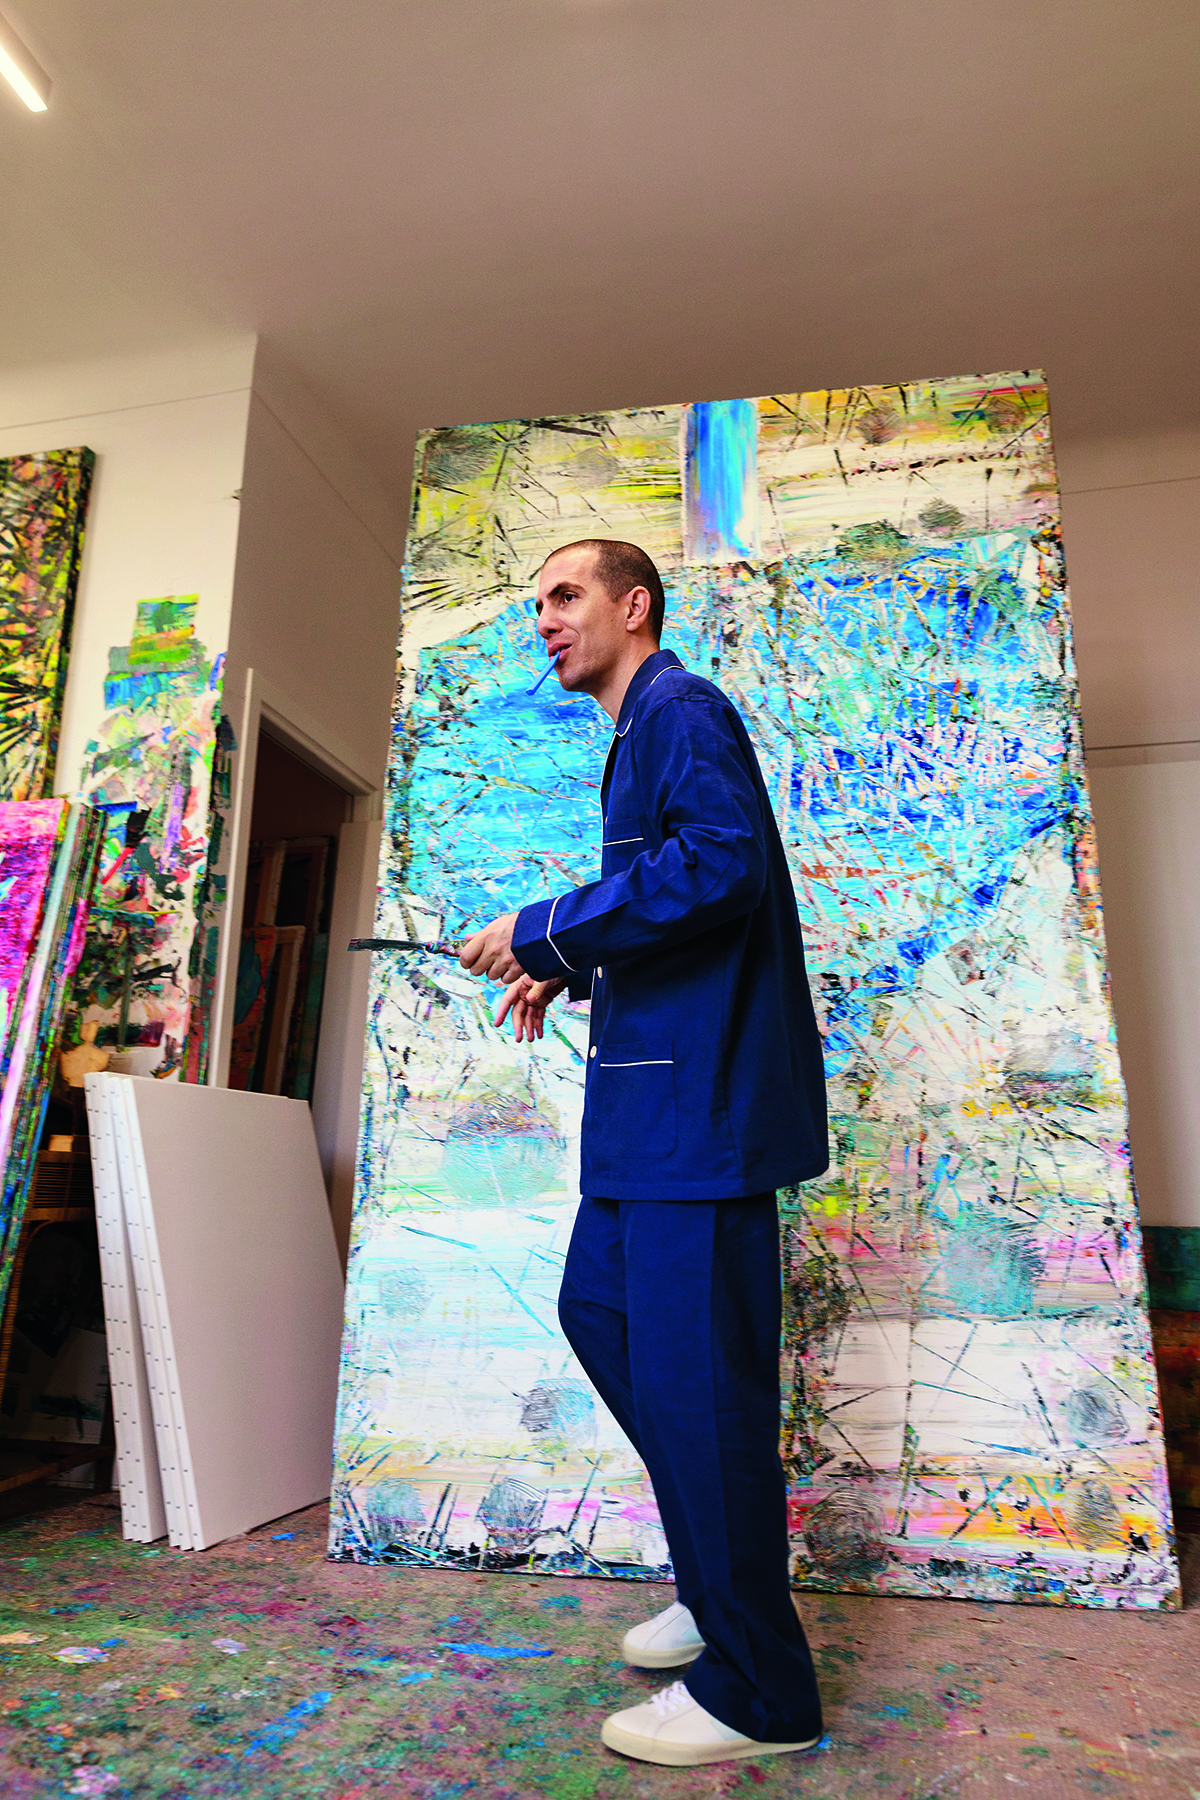 An artist in a studio standing in front of a multicoloured painted canvas